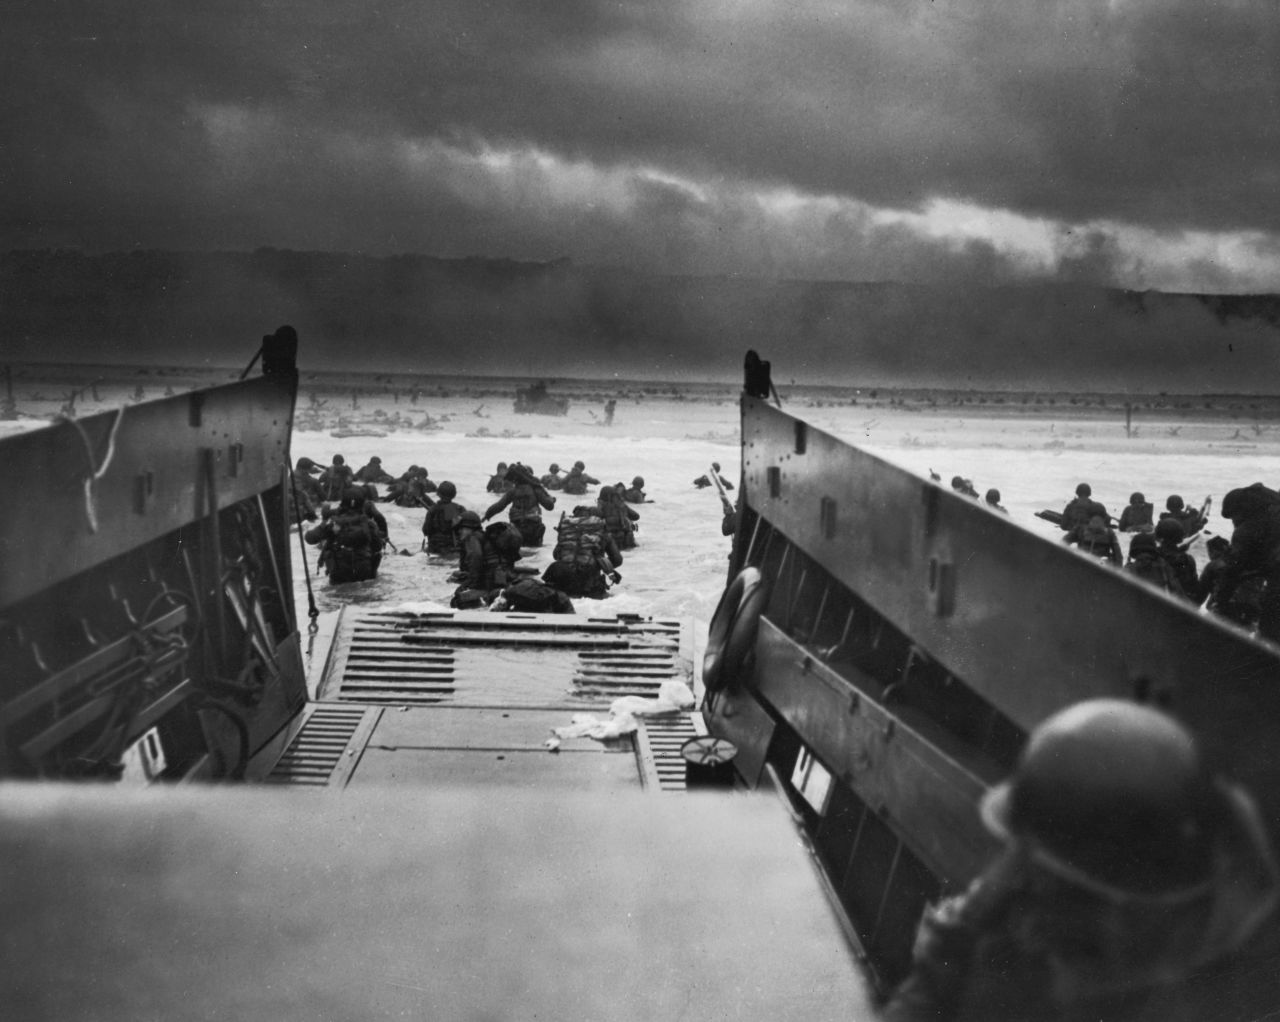 American troops storm the beaches of Normandy, France, on June 6, 1944. D-Day was the largest amphibious invasion in history. More than 160,000 Allied troops -- about half of them Americans -- invaded Western Europe, overwhelming German forces in an operation that proved to be a turning point in World War II.